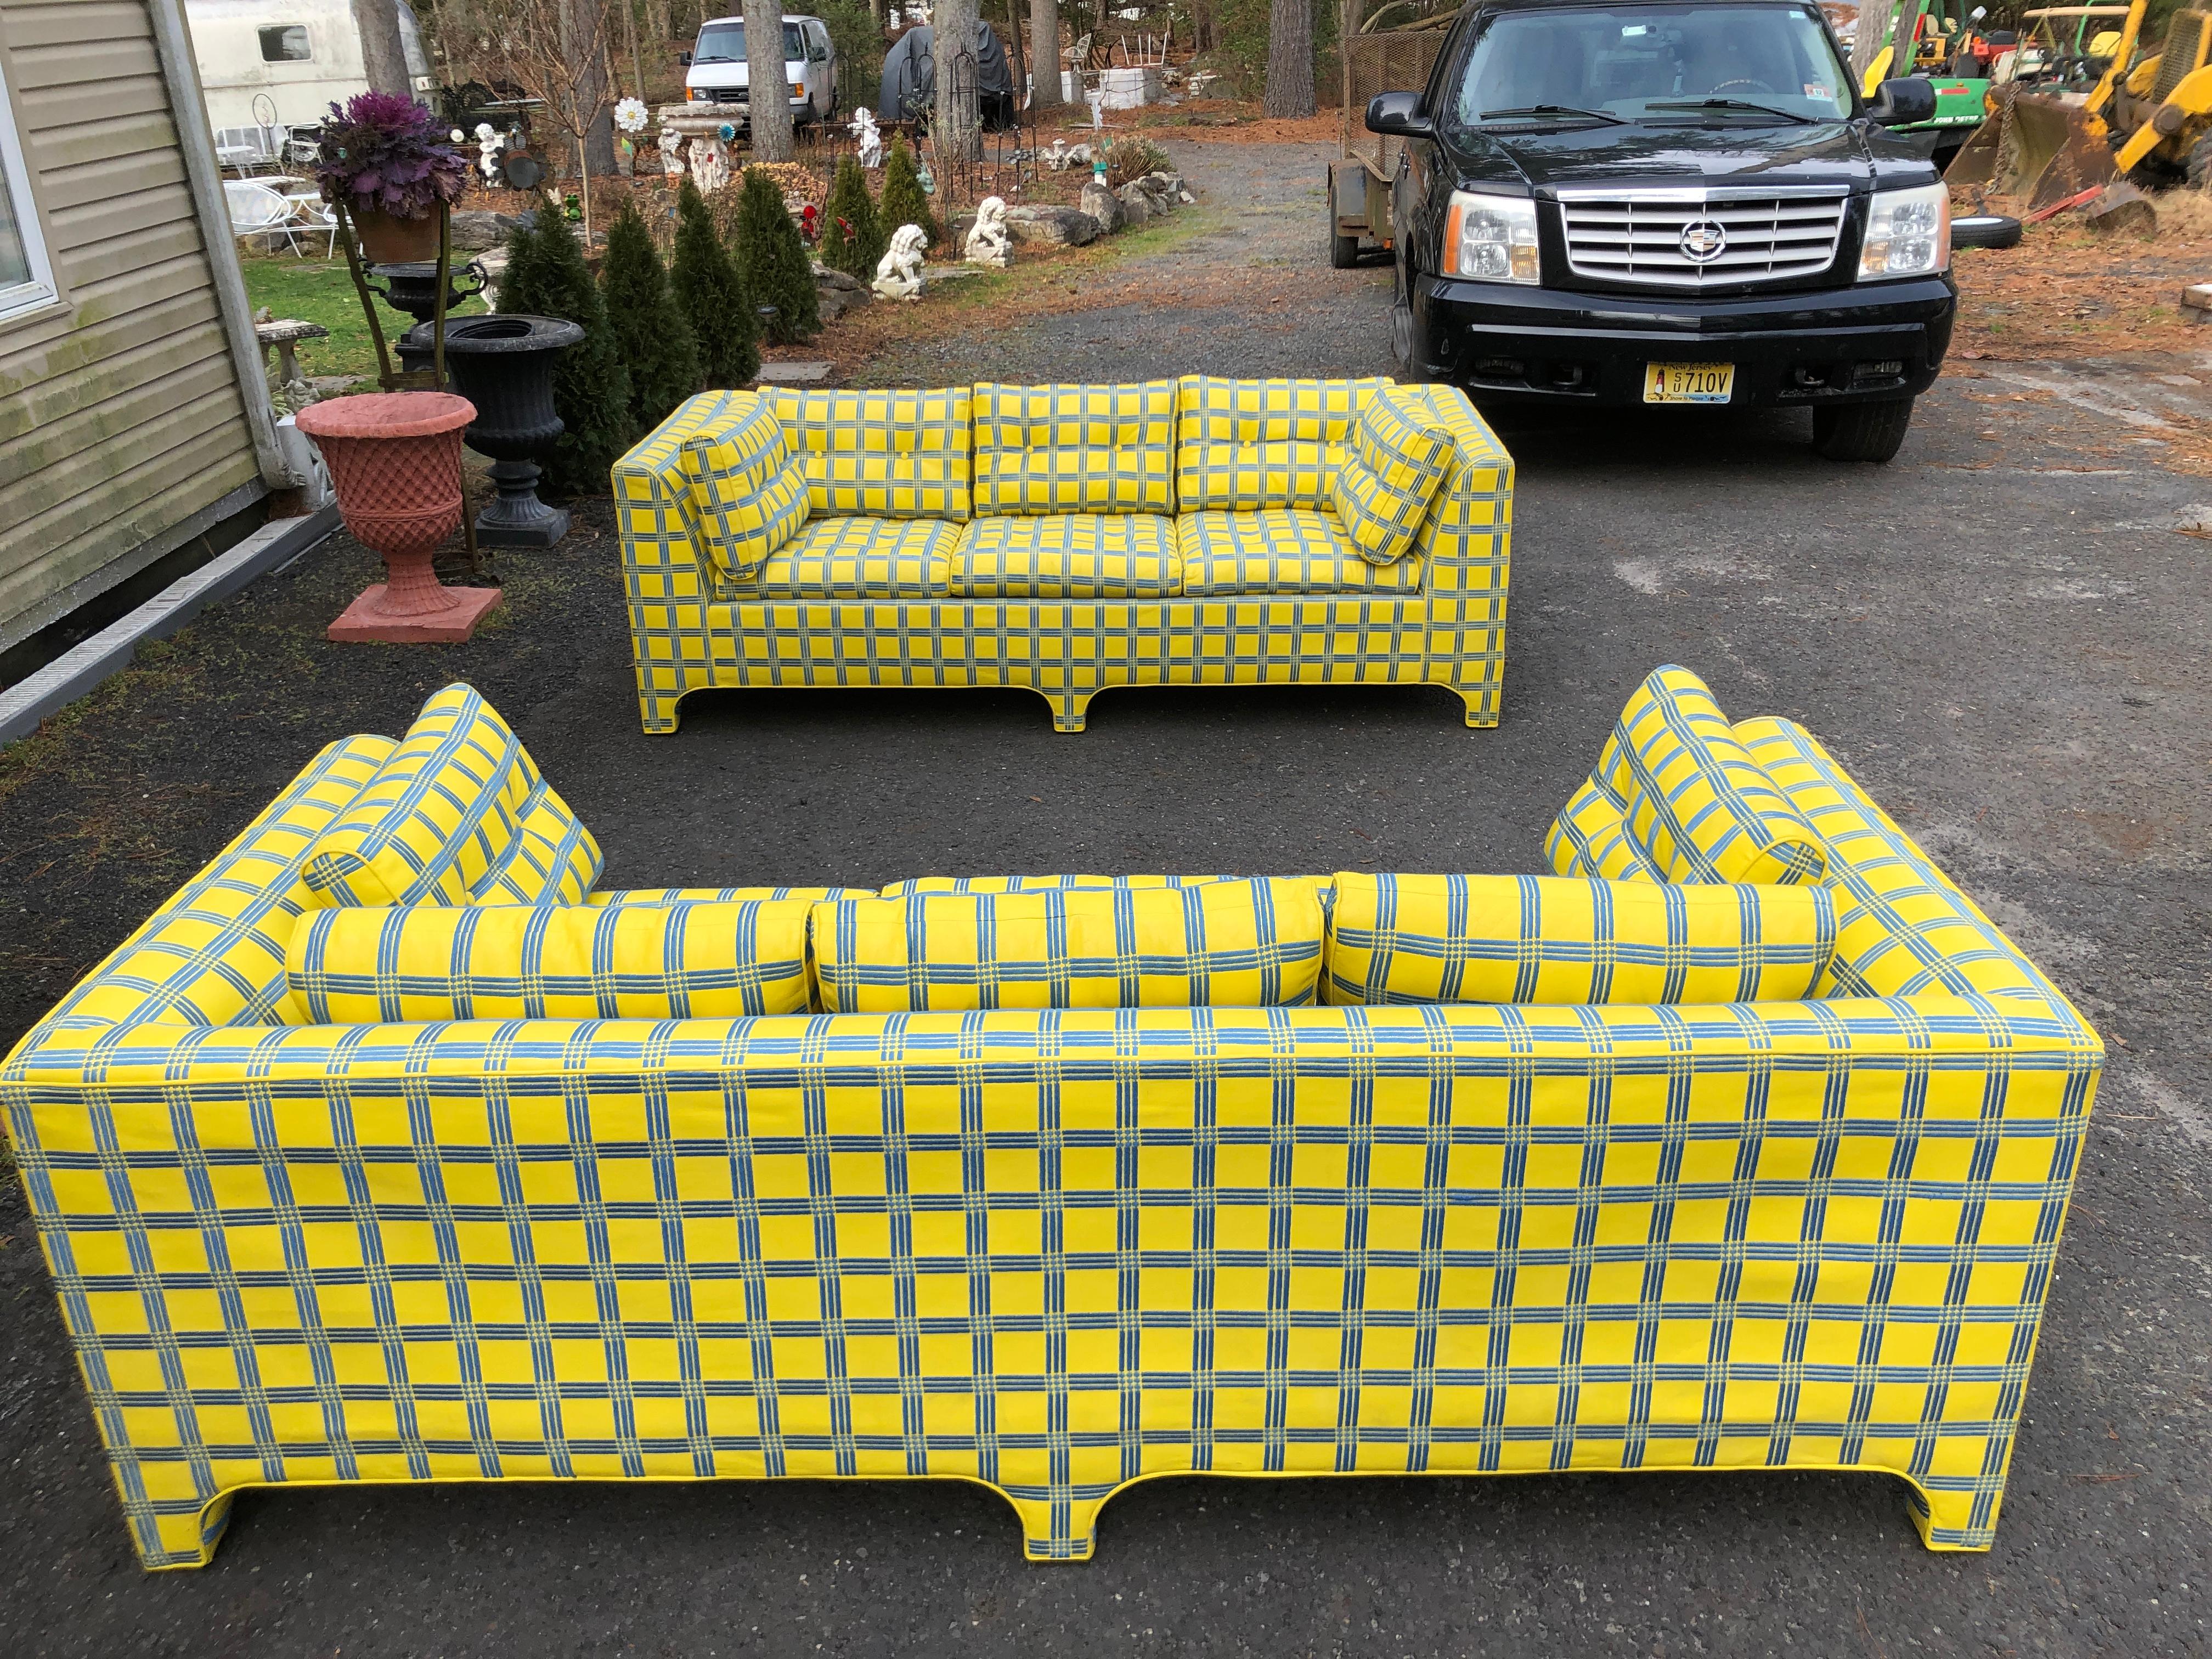 Stellar pair of Milo Baughman yellow leather parsons sofas.  This pair is in remarkable vintage condition with only light signs of age.  The magnificent yellow leather has embroidered blue lines creating a plaid effect-just gorgeous!  If you looking